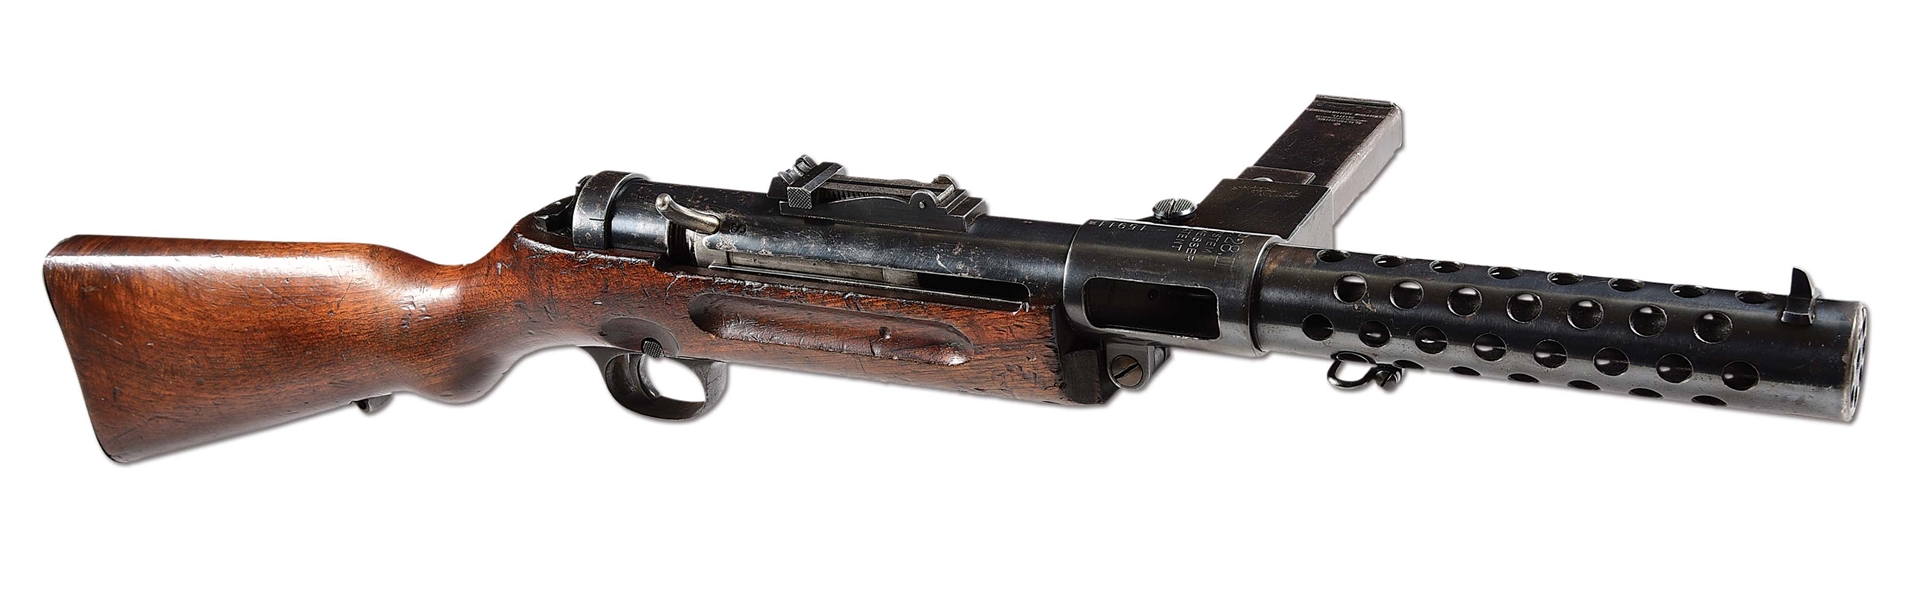 (N) EXTREMELY SCARCE AND HIGHLY DESIRABLE NAZI PROOFED ORIGINAL GERMAN WORLD WAR II MP-28 MACHINE GUN (CURIO AND RELIC).